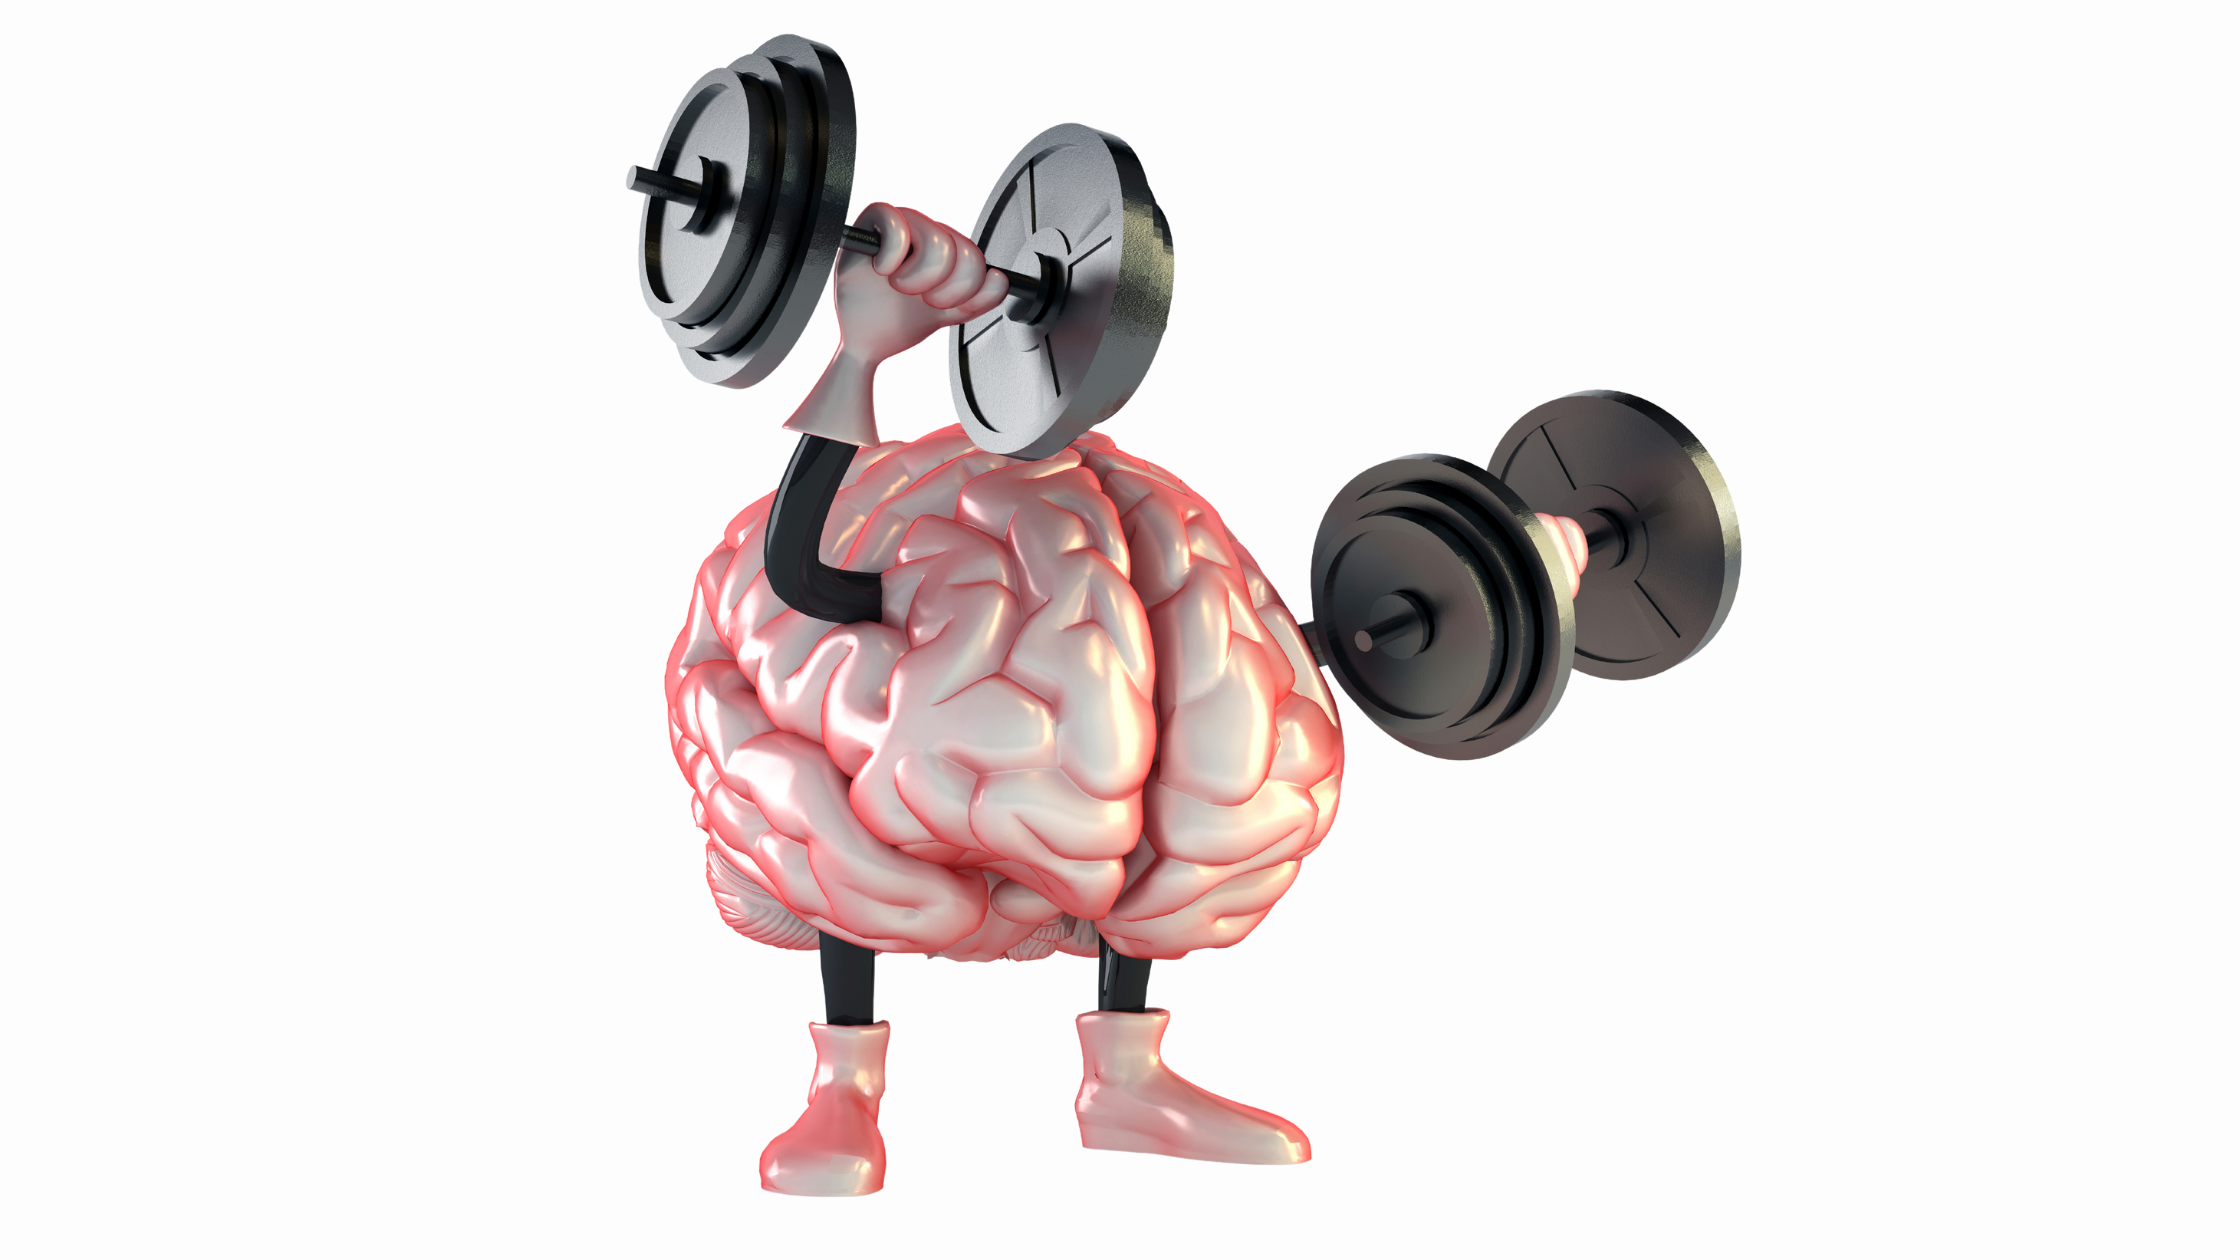 image of a brain with legs lifting weights